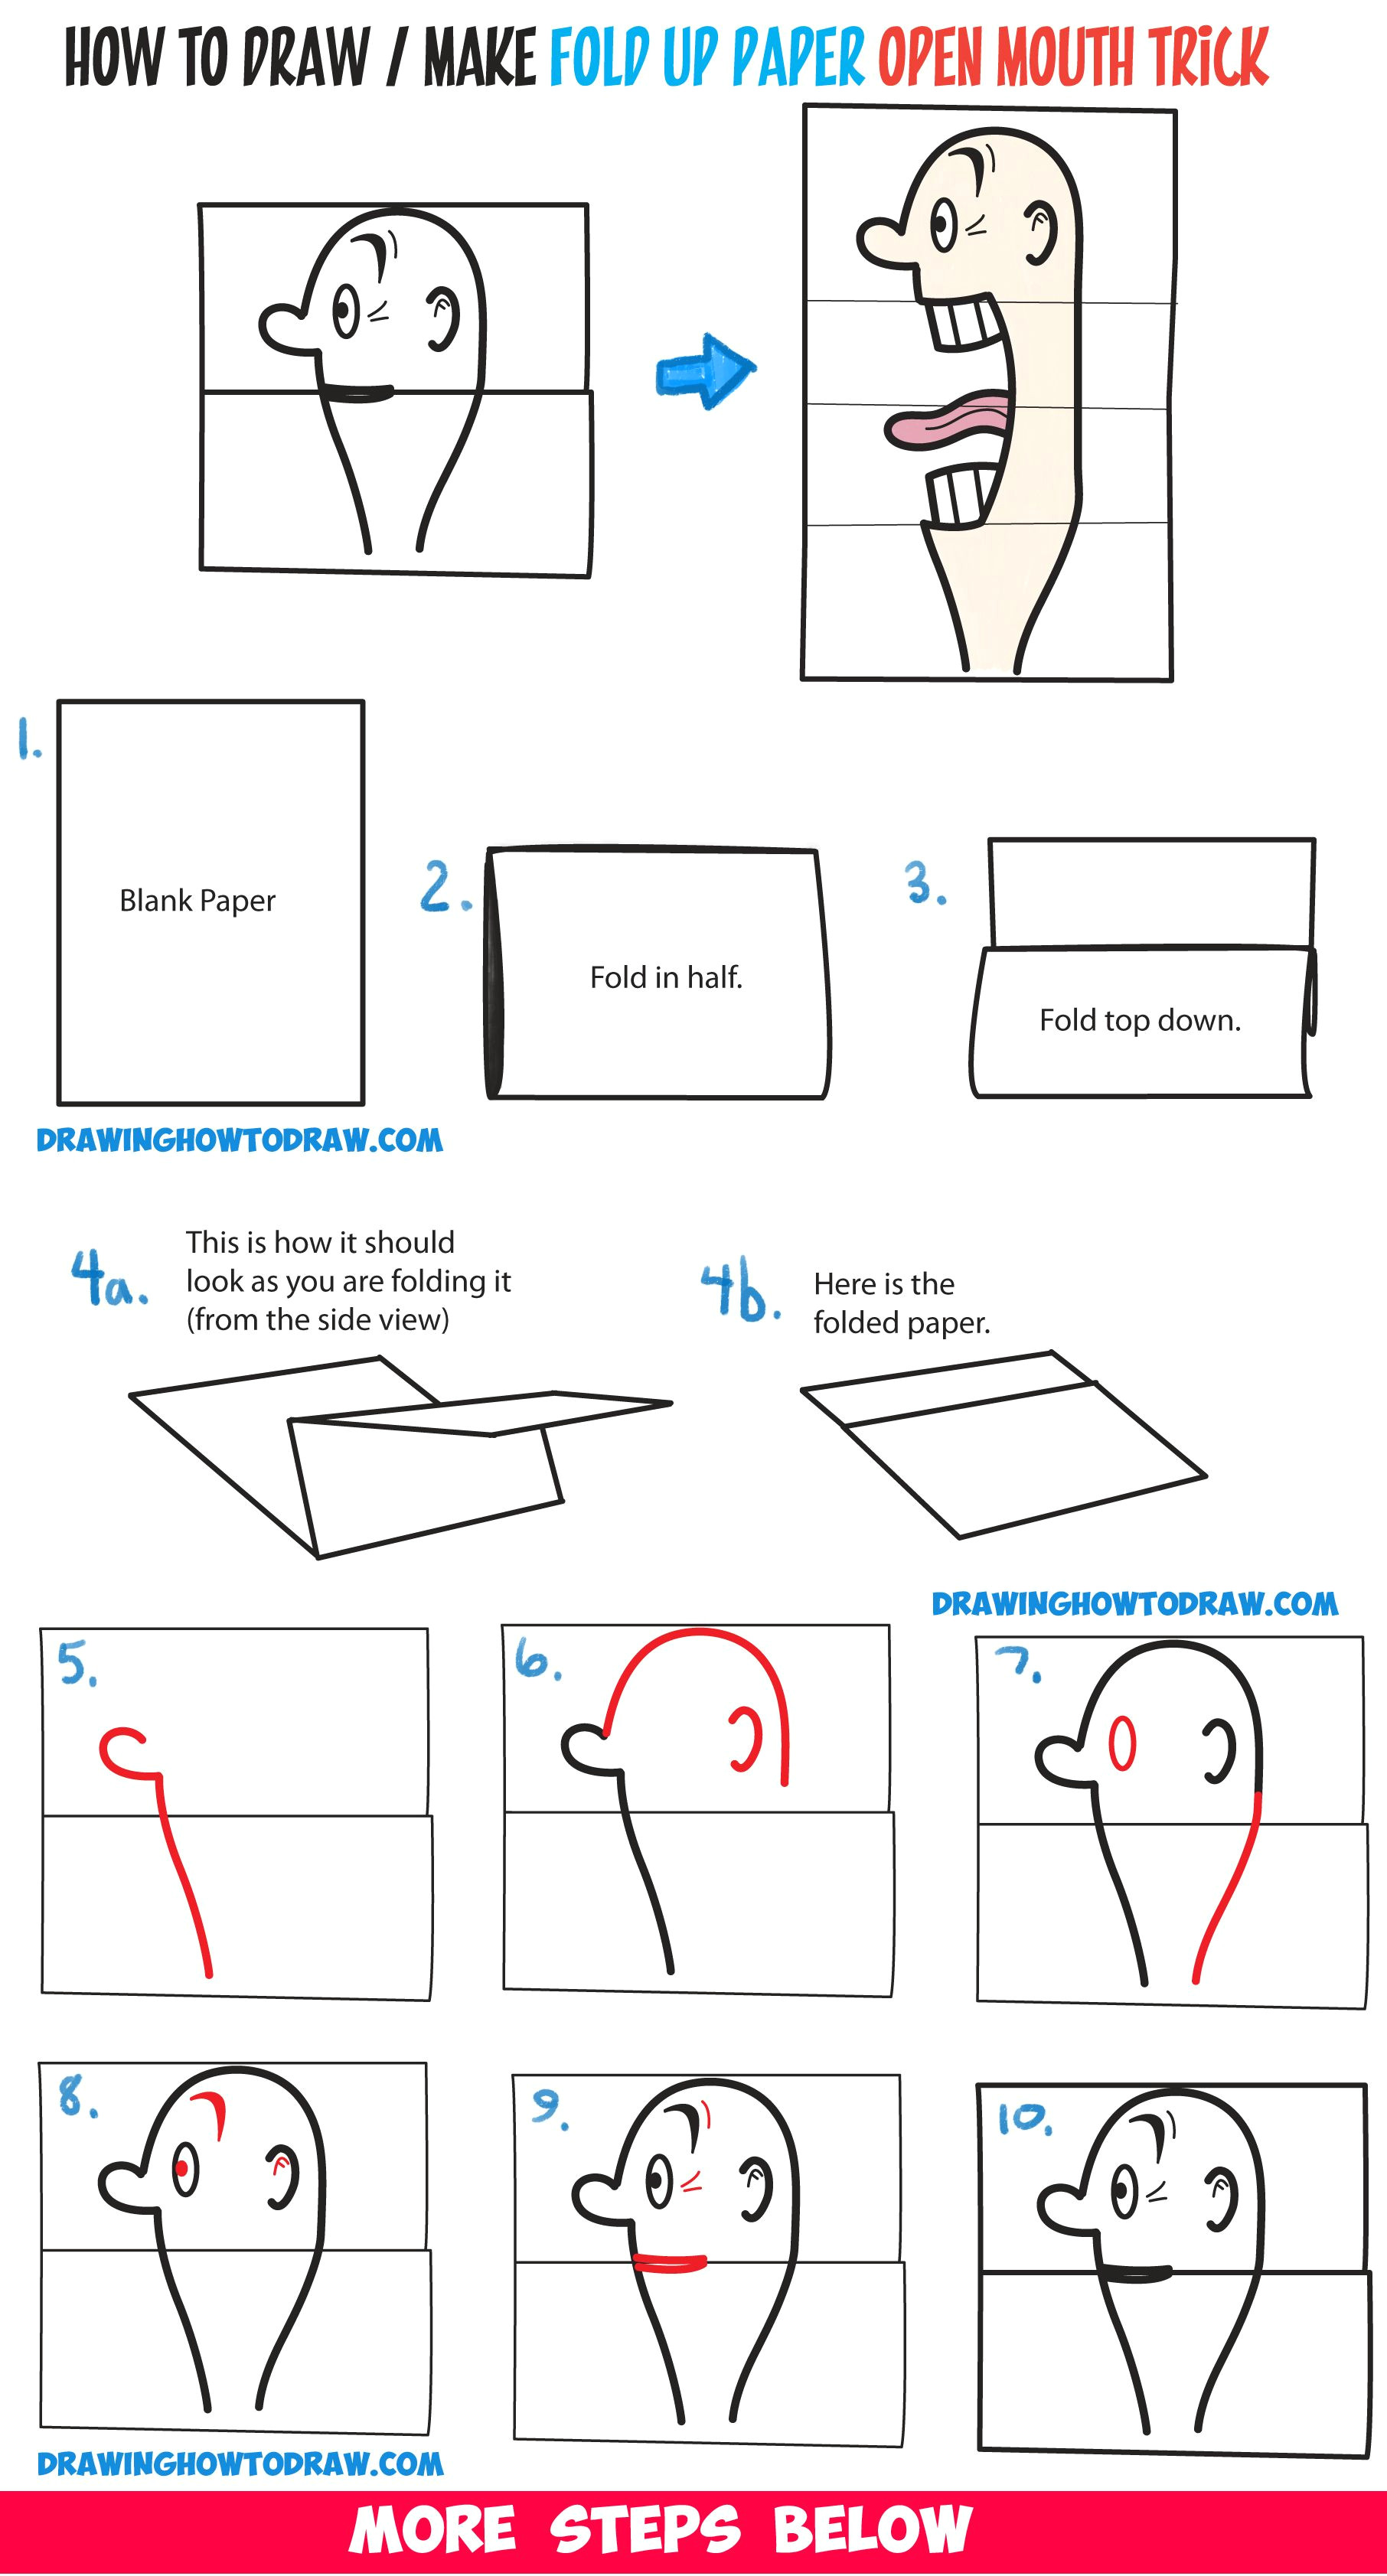 Drawing Easy Tricks How to Draw A Big Opening Mouth Paper Folding Trick Perfect for